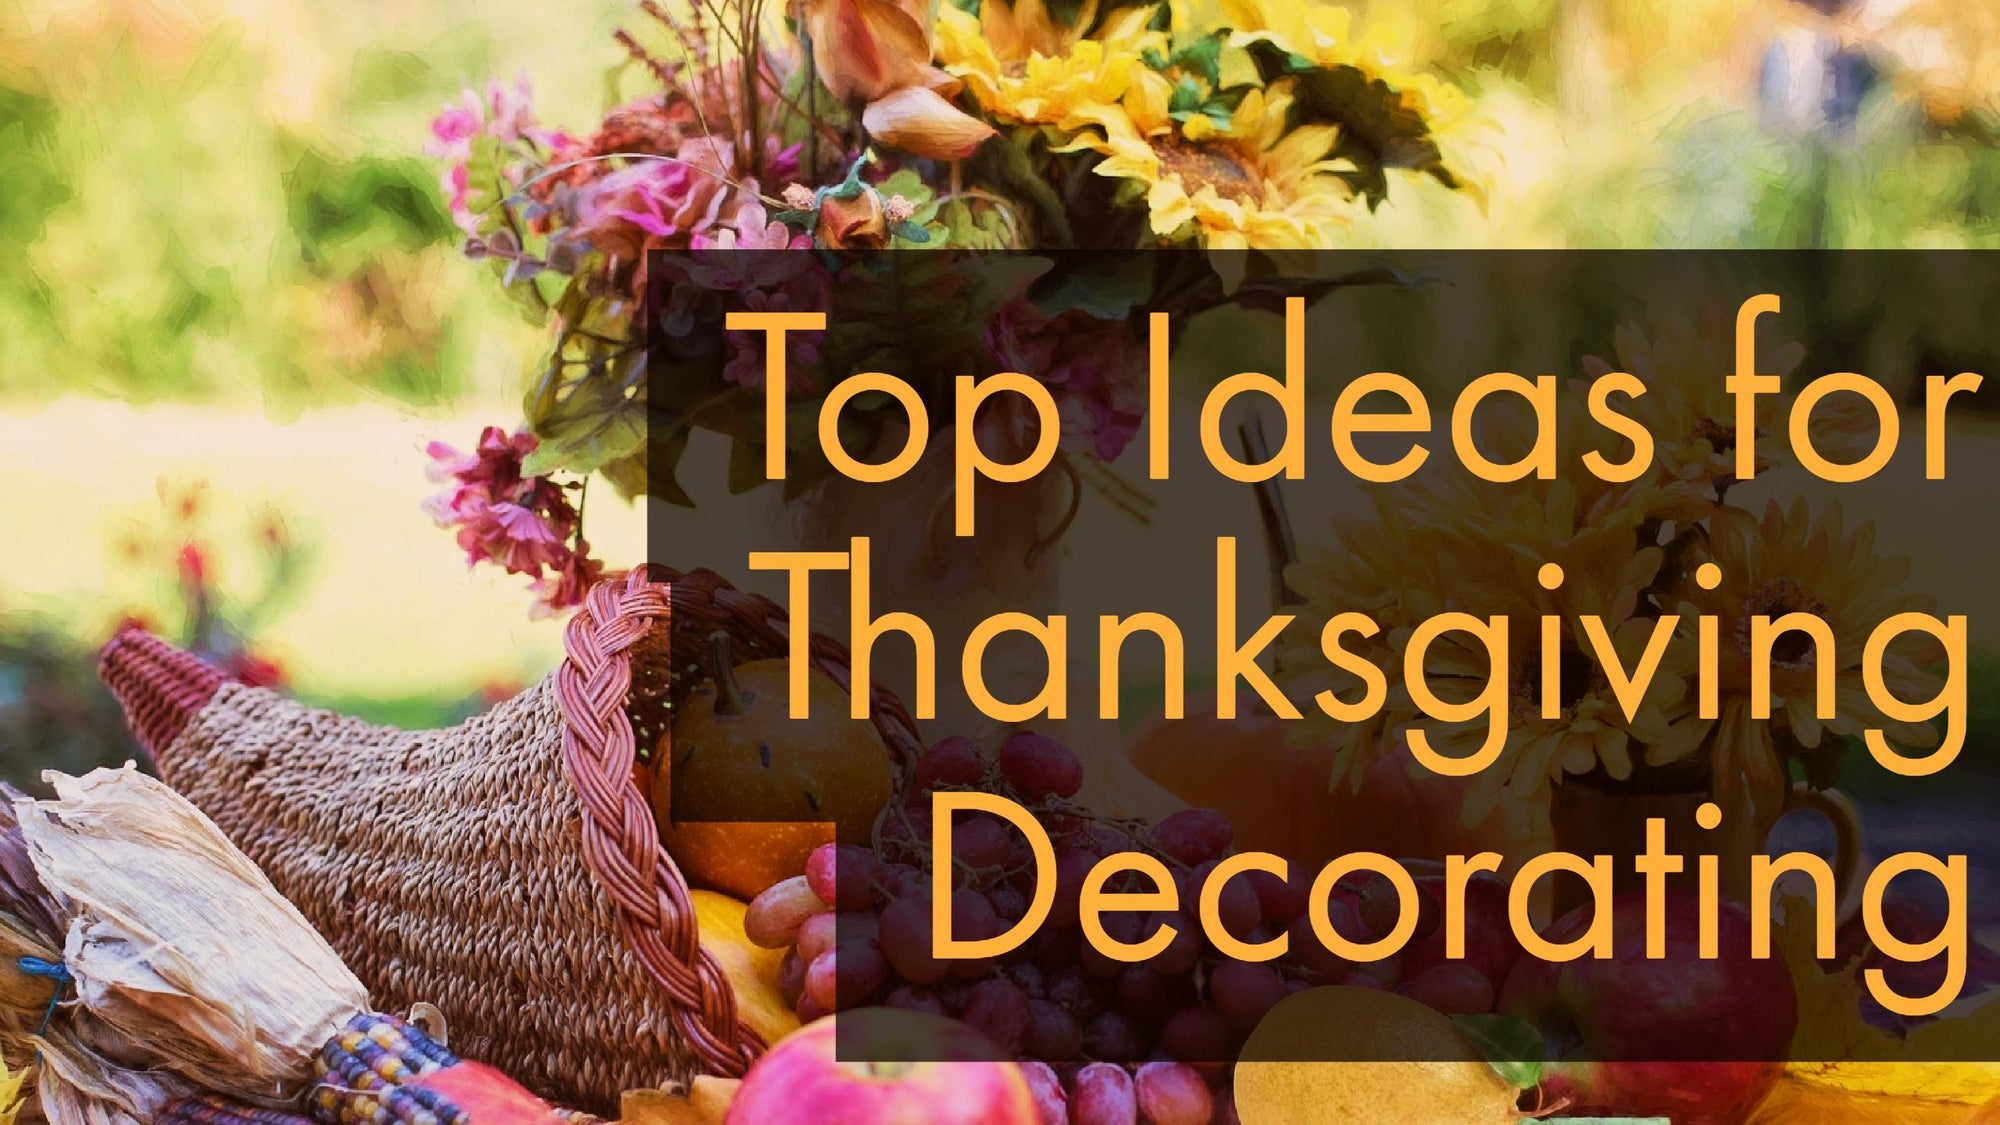 Top Ideas for Thanksgiving Decorating